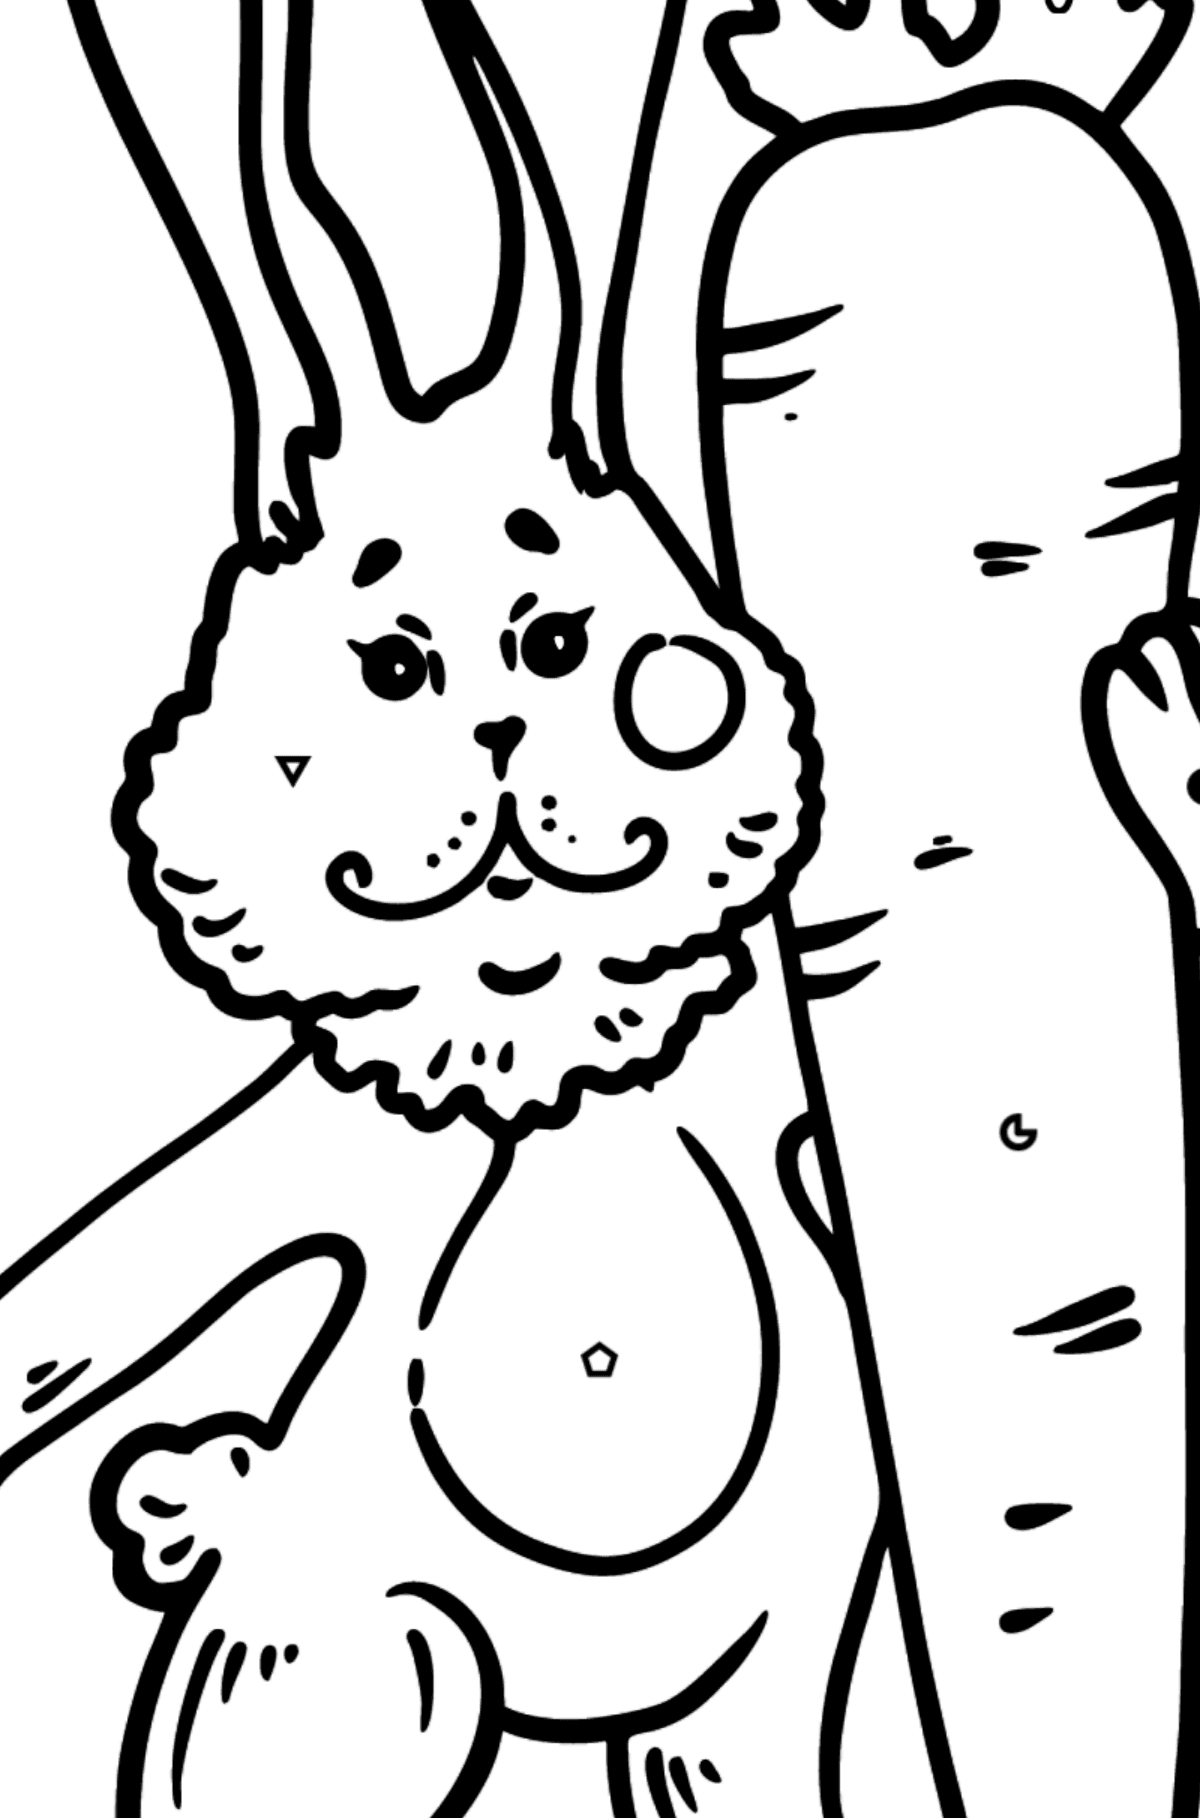 Bunny with Carrot coloring page - Coloring by Symbols and Geometric Shapes for Kids